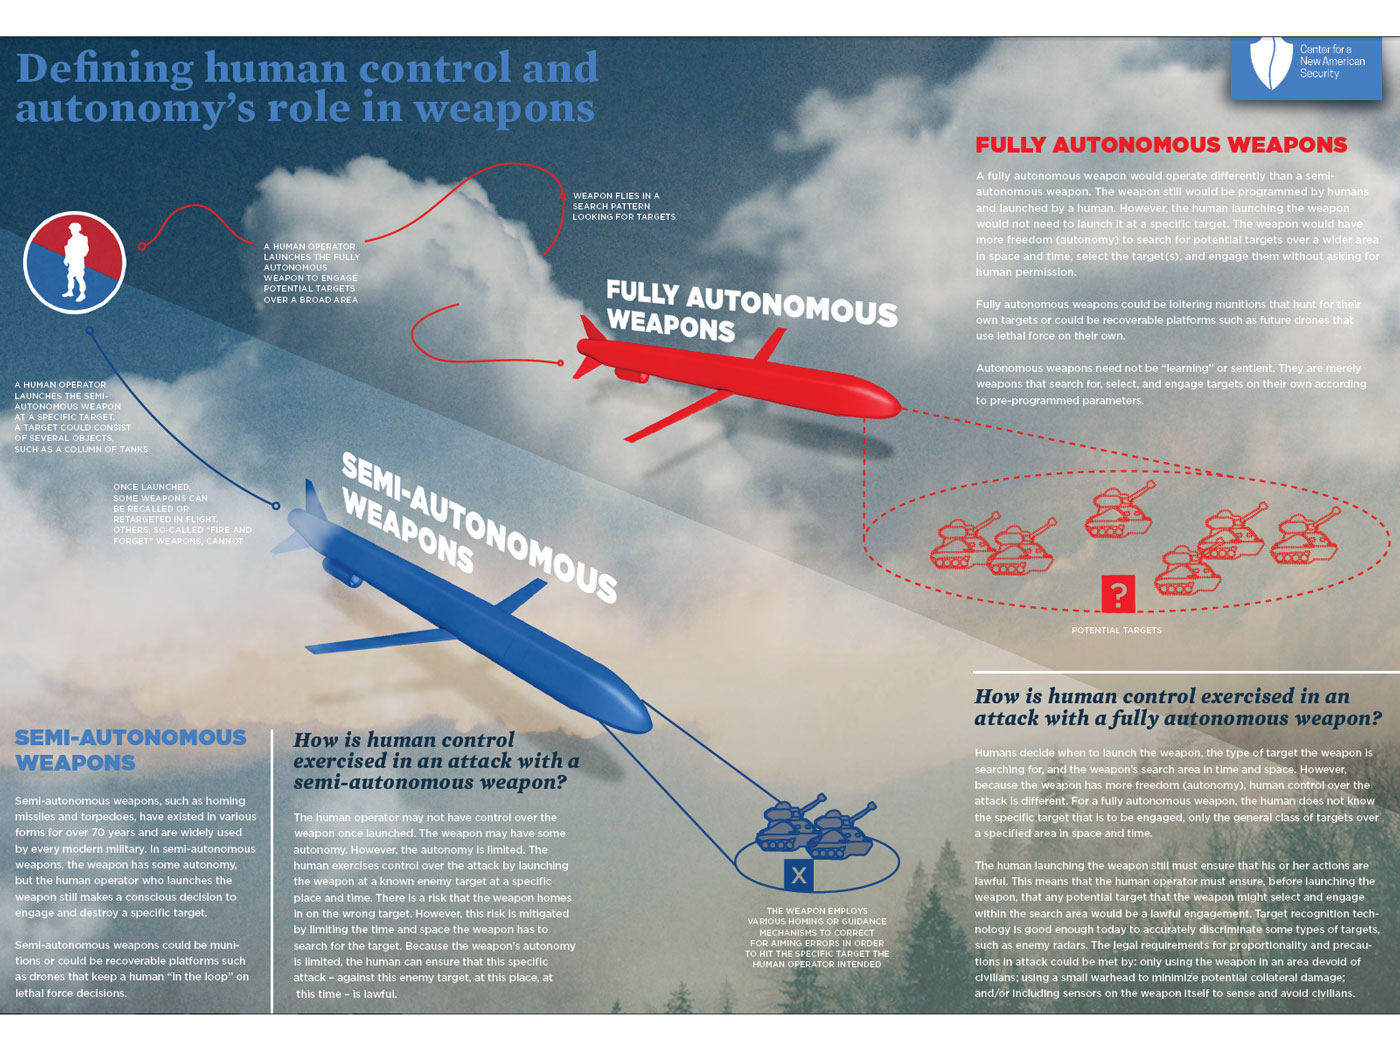 Enlarged view: Image: Defining human control and autonomy's role in weapons